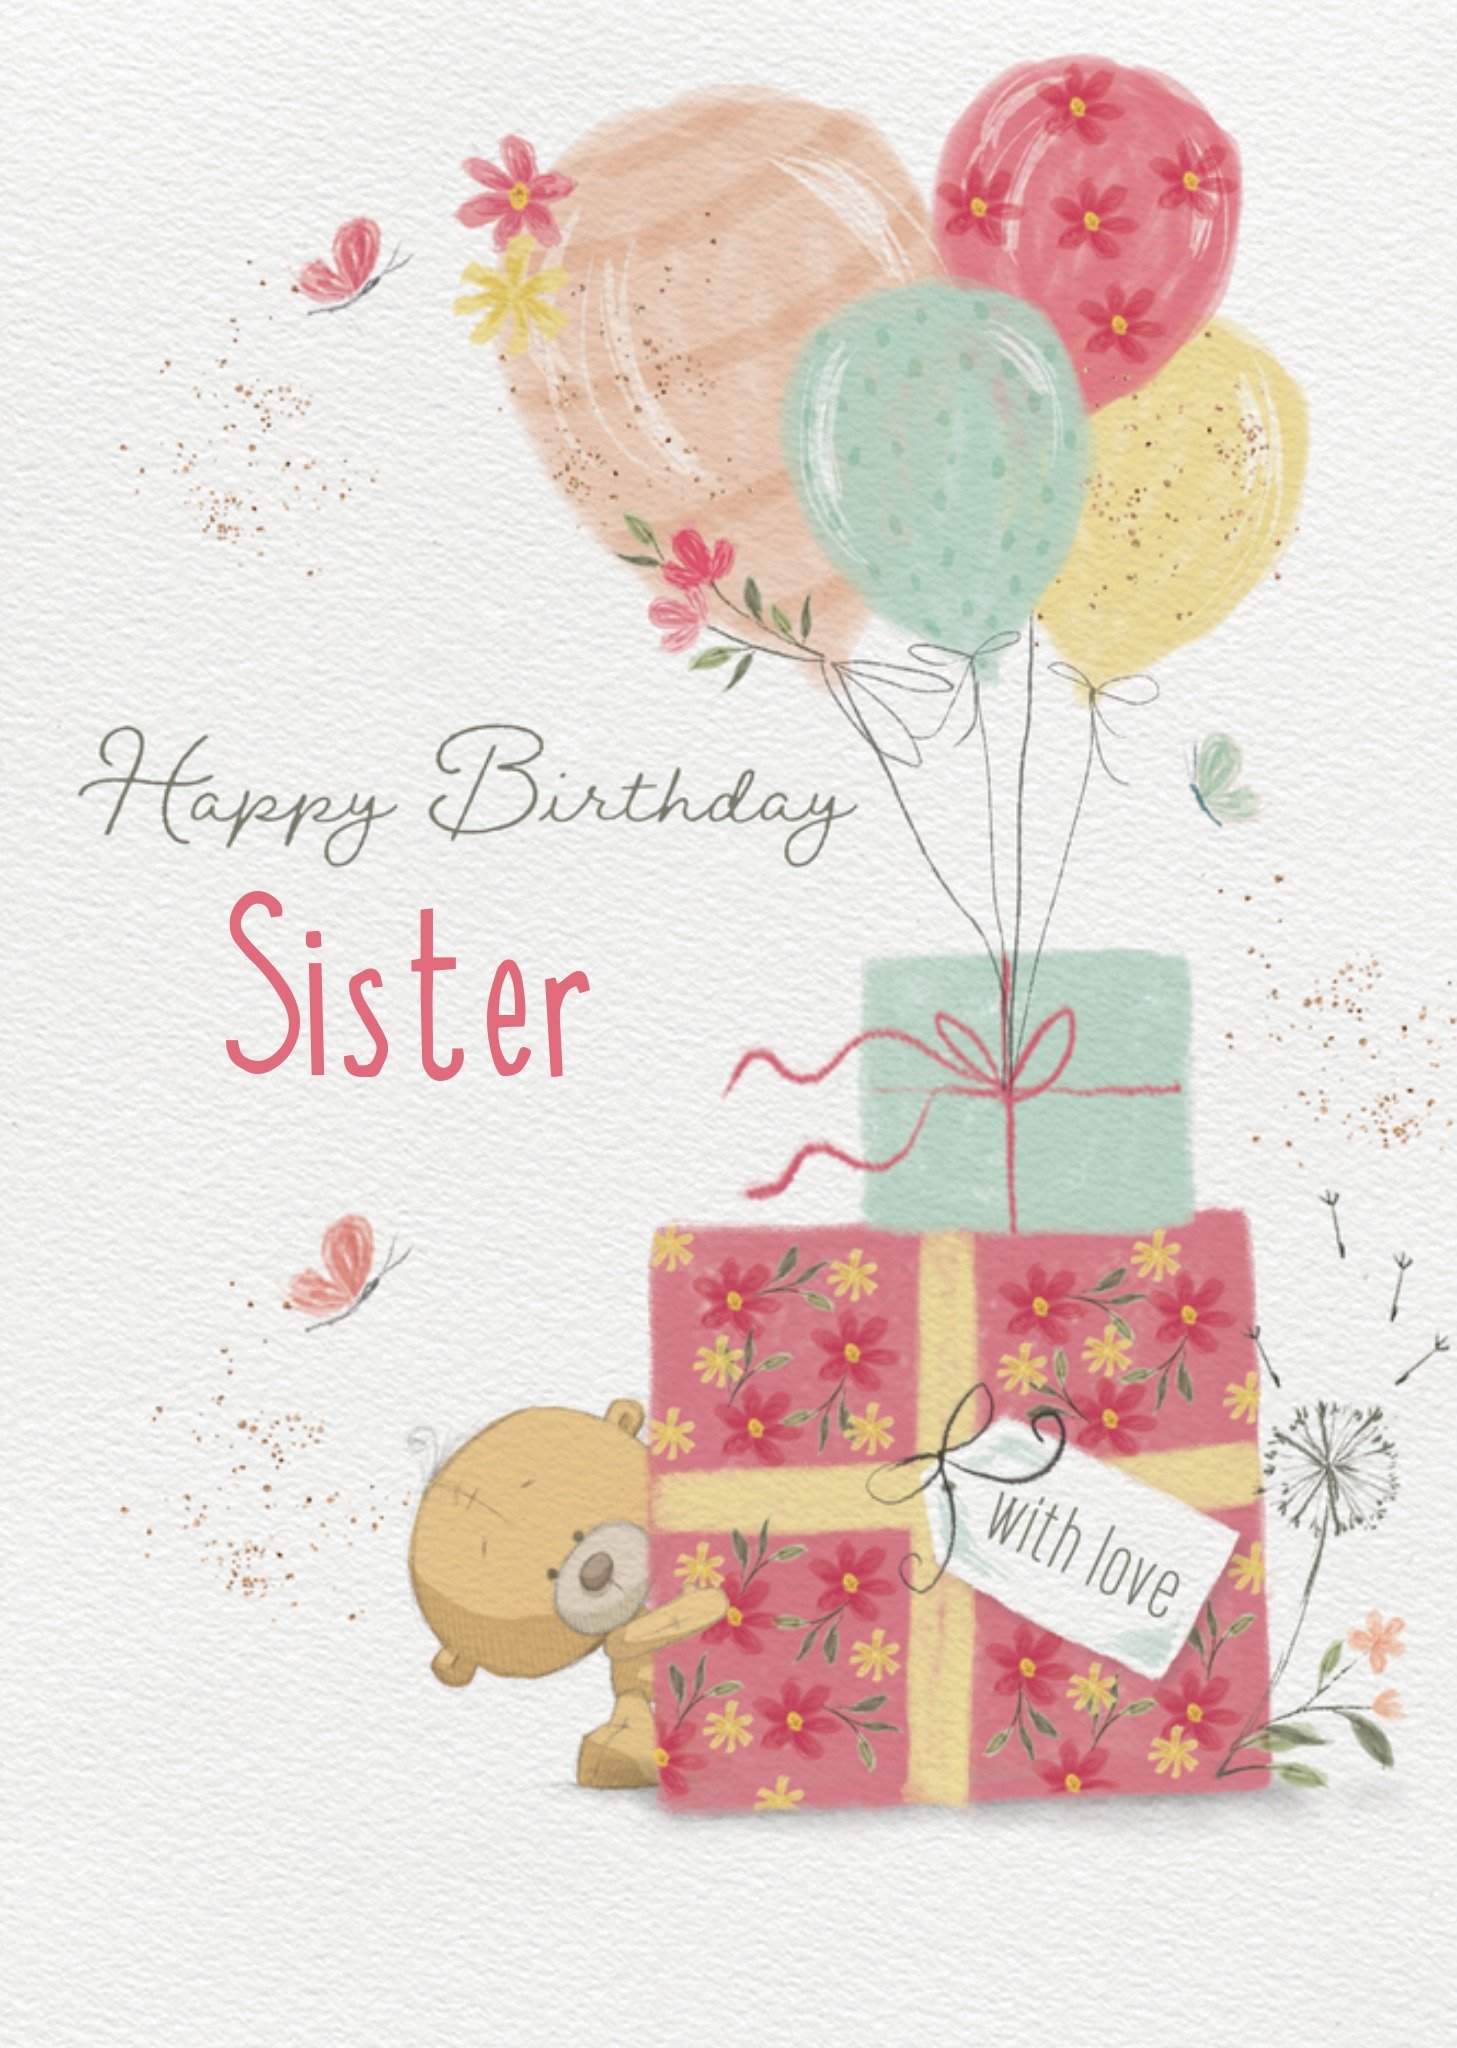 Uddle Happy Birthday Sister Illustrated Balloons And Wrapped Presents Birthday Card, Large